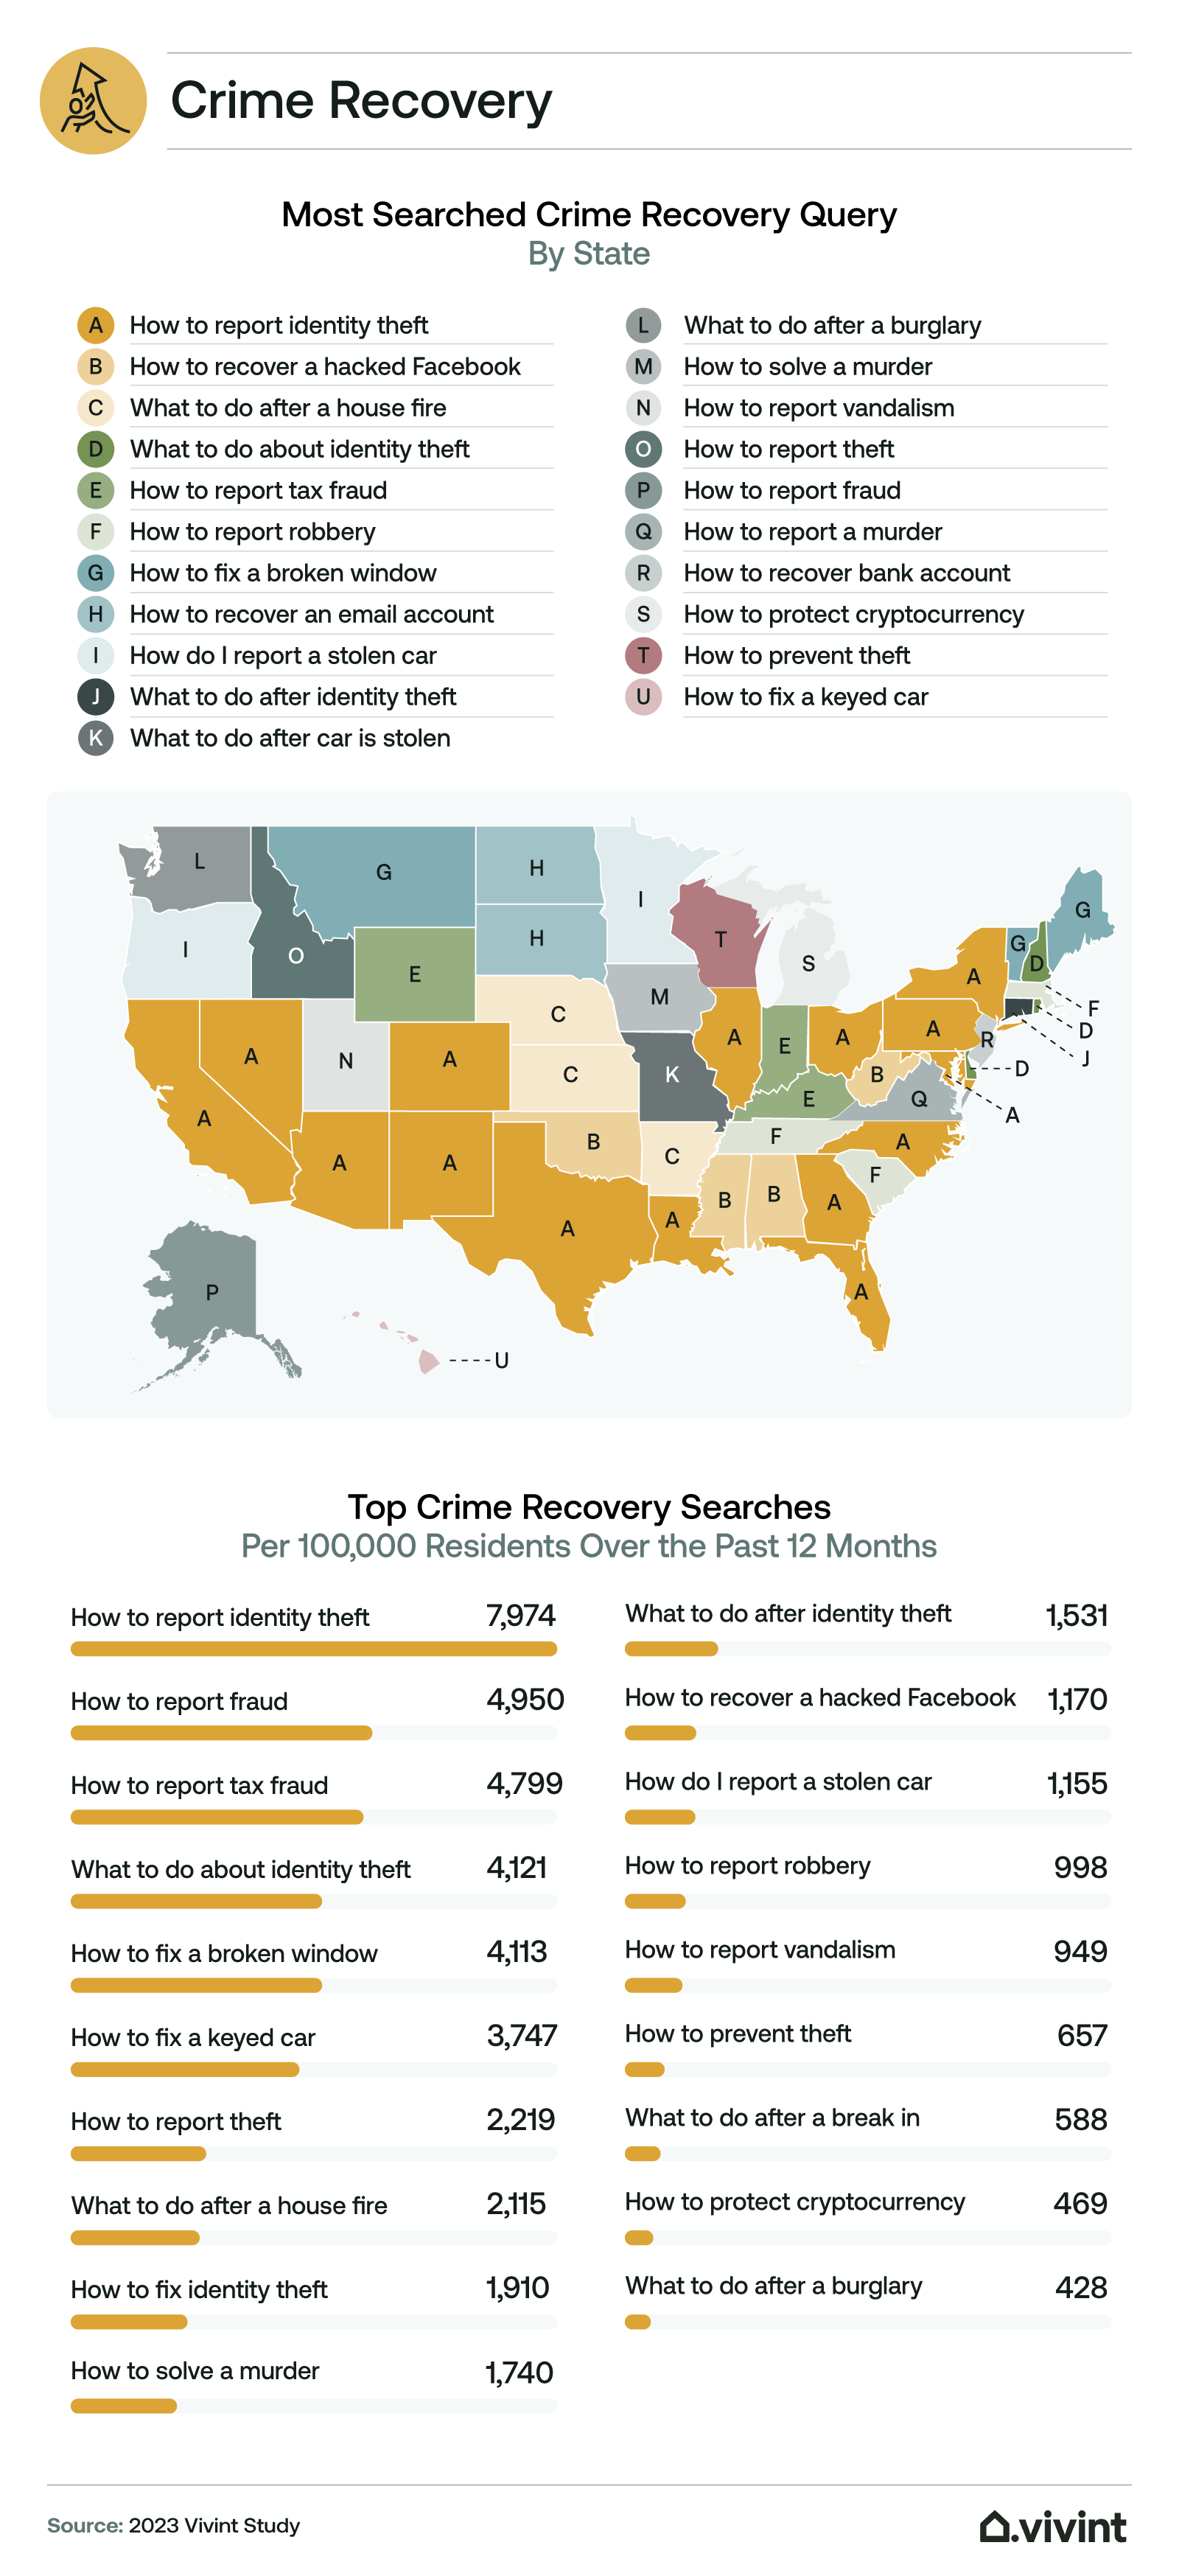 Information about the most-searched crime recovery searches.